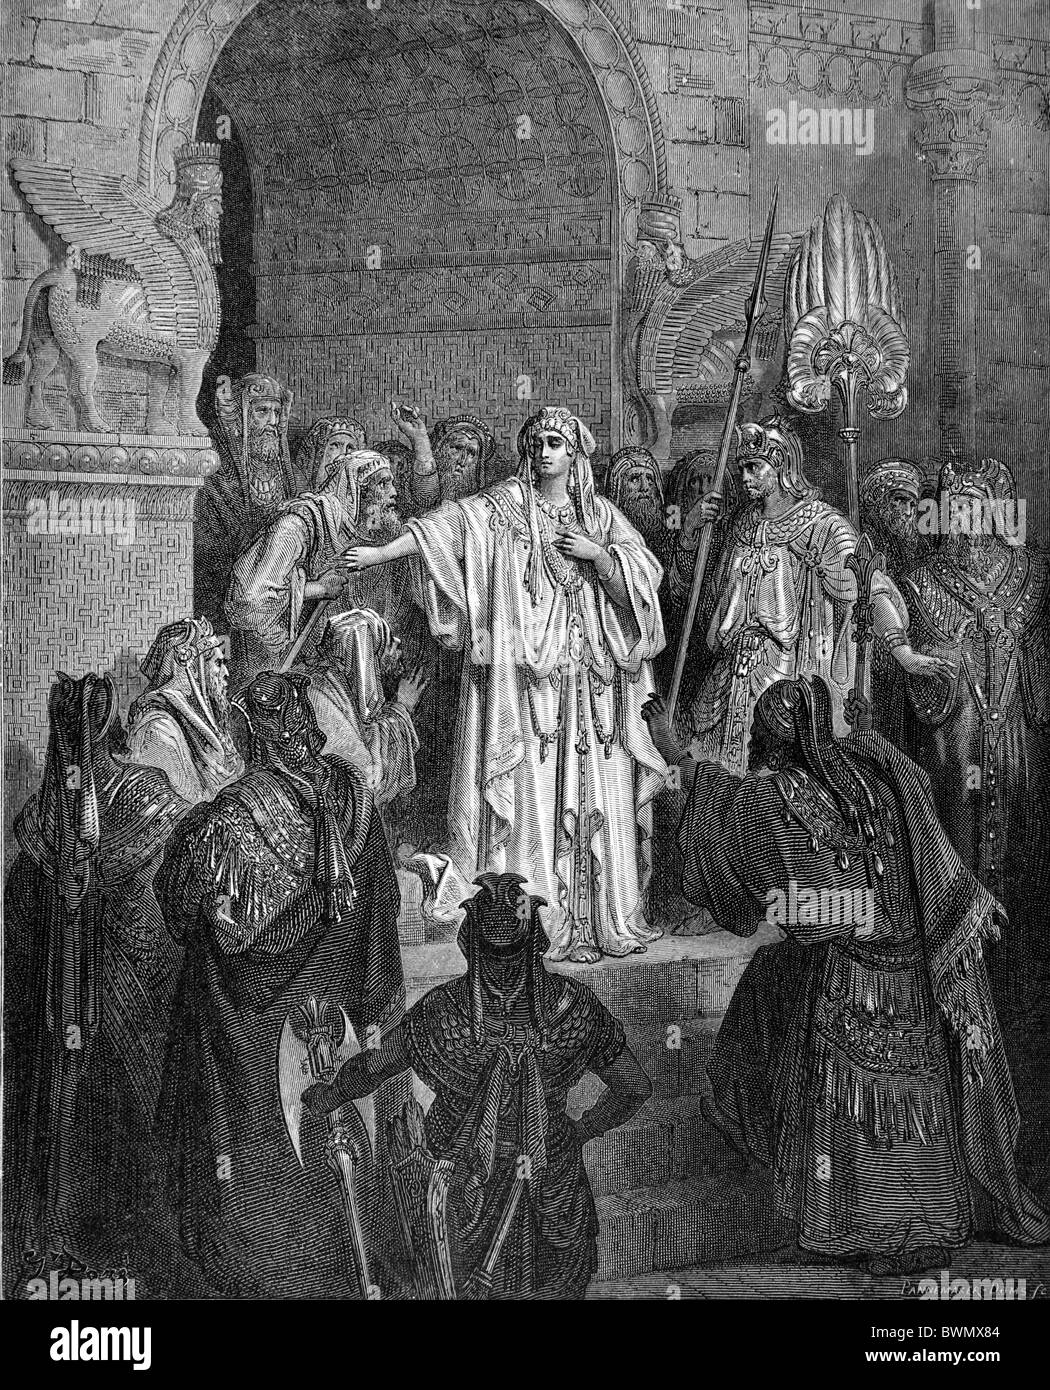 Gustave Doré; The Queen Vashti refusing to obey the command of Ahasuerus; Book of Esther; Black and White Engraving Stock Photo